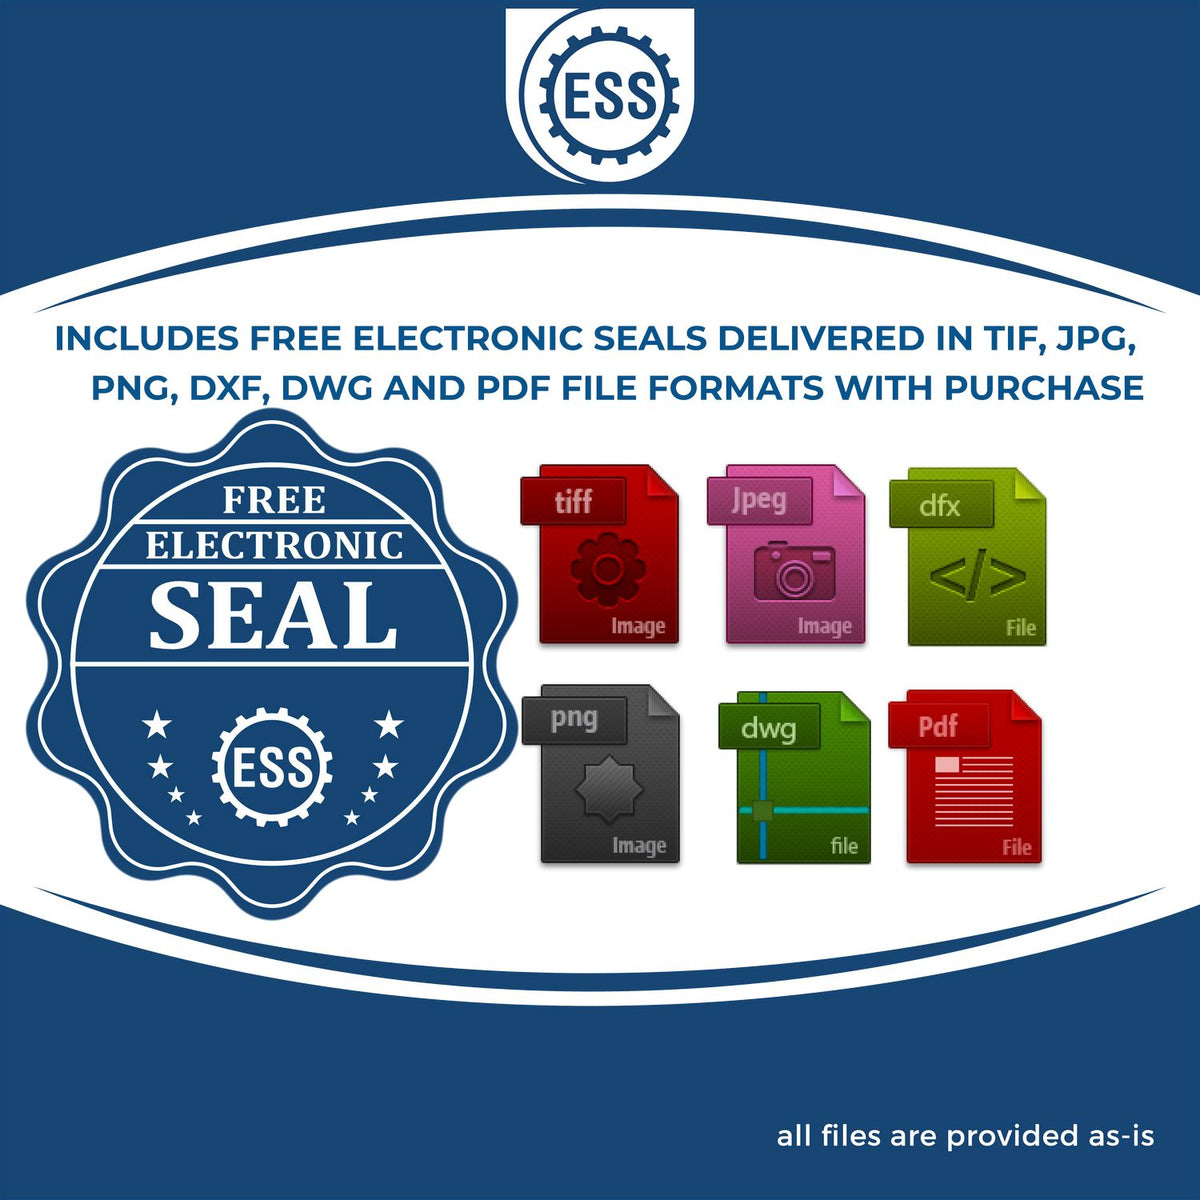 An infographic for the free electronic seal for the Alaska Geologist Desk Seal illustrating the different file type icons such as DXF, DWG, TIF, JPG and PNG.